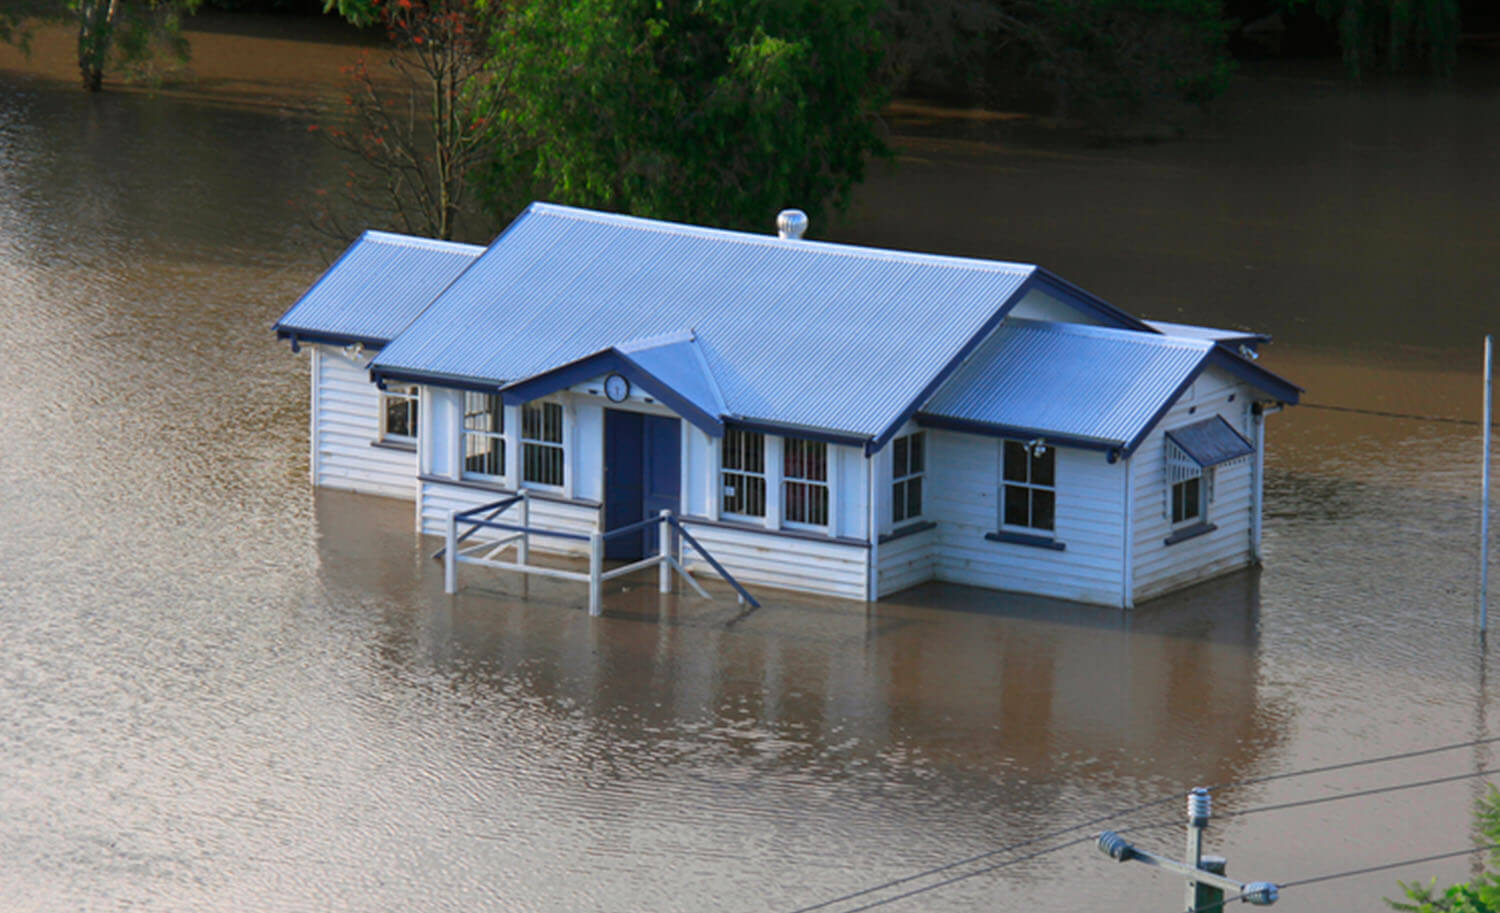 flooded house entirely surrounded by water and cut off from land